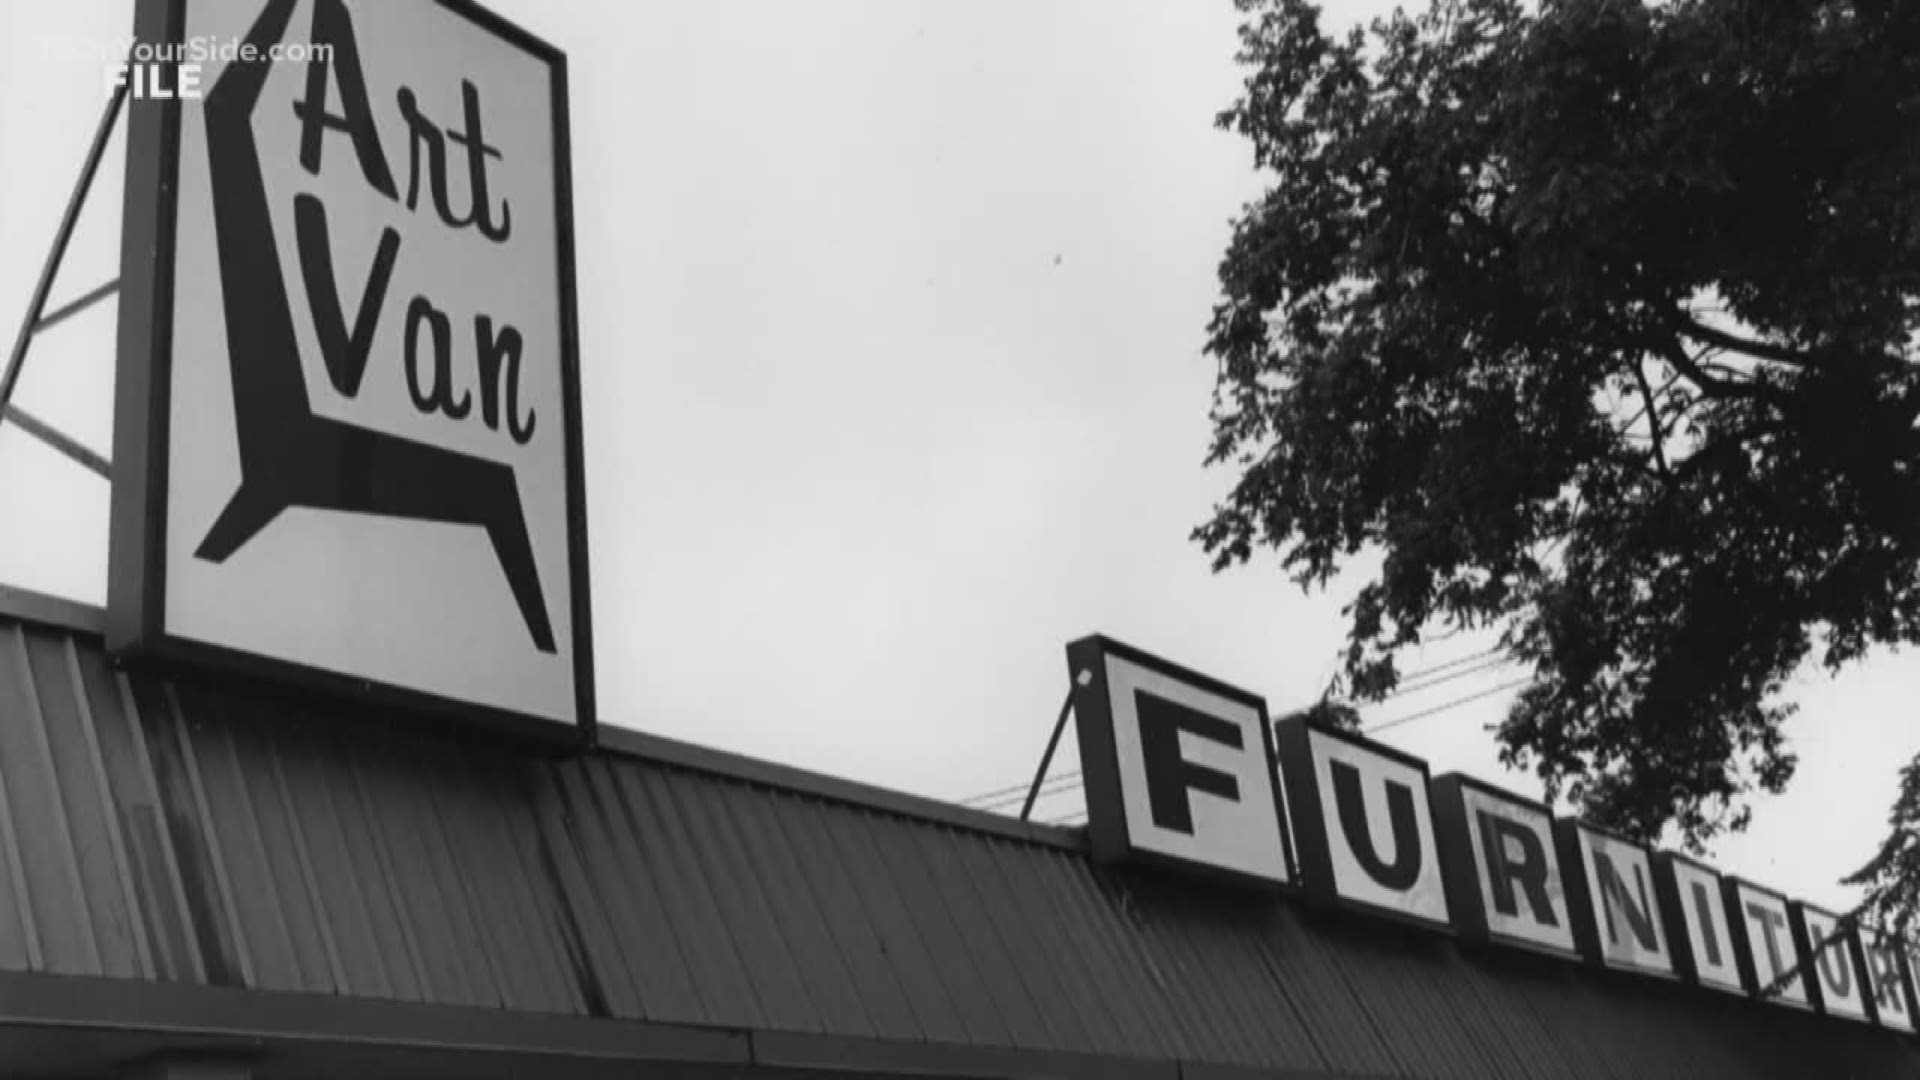 Art Van Furniture is closing all its locations and will begin liquidation sales Friday.